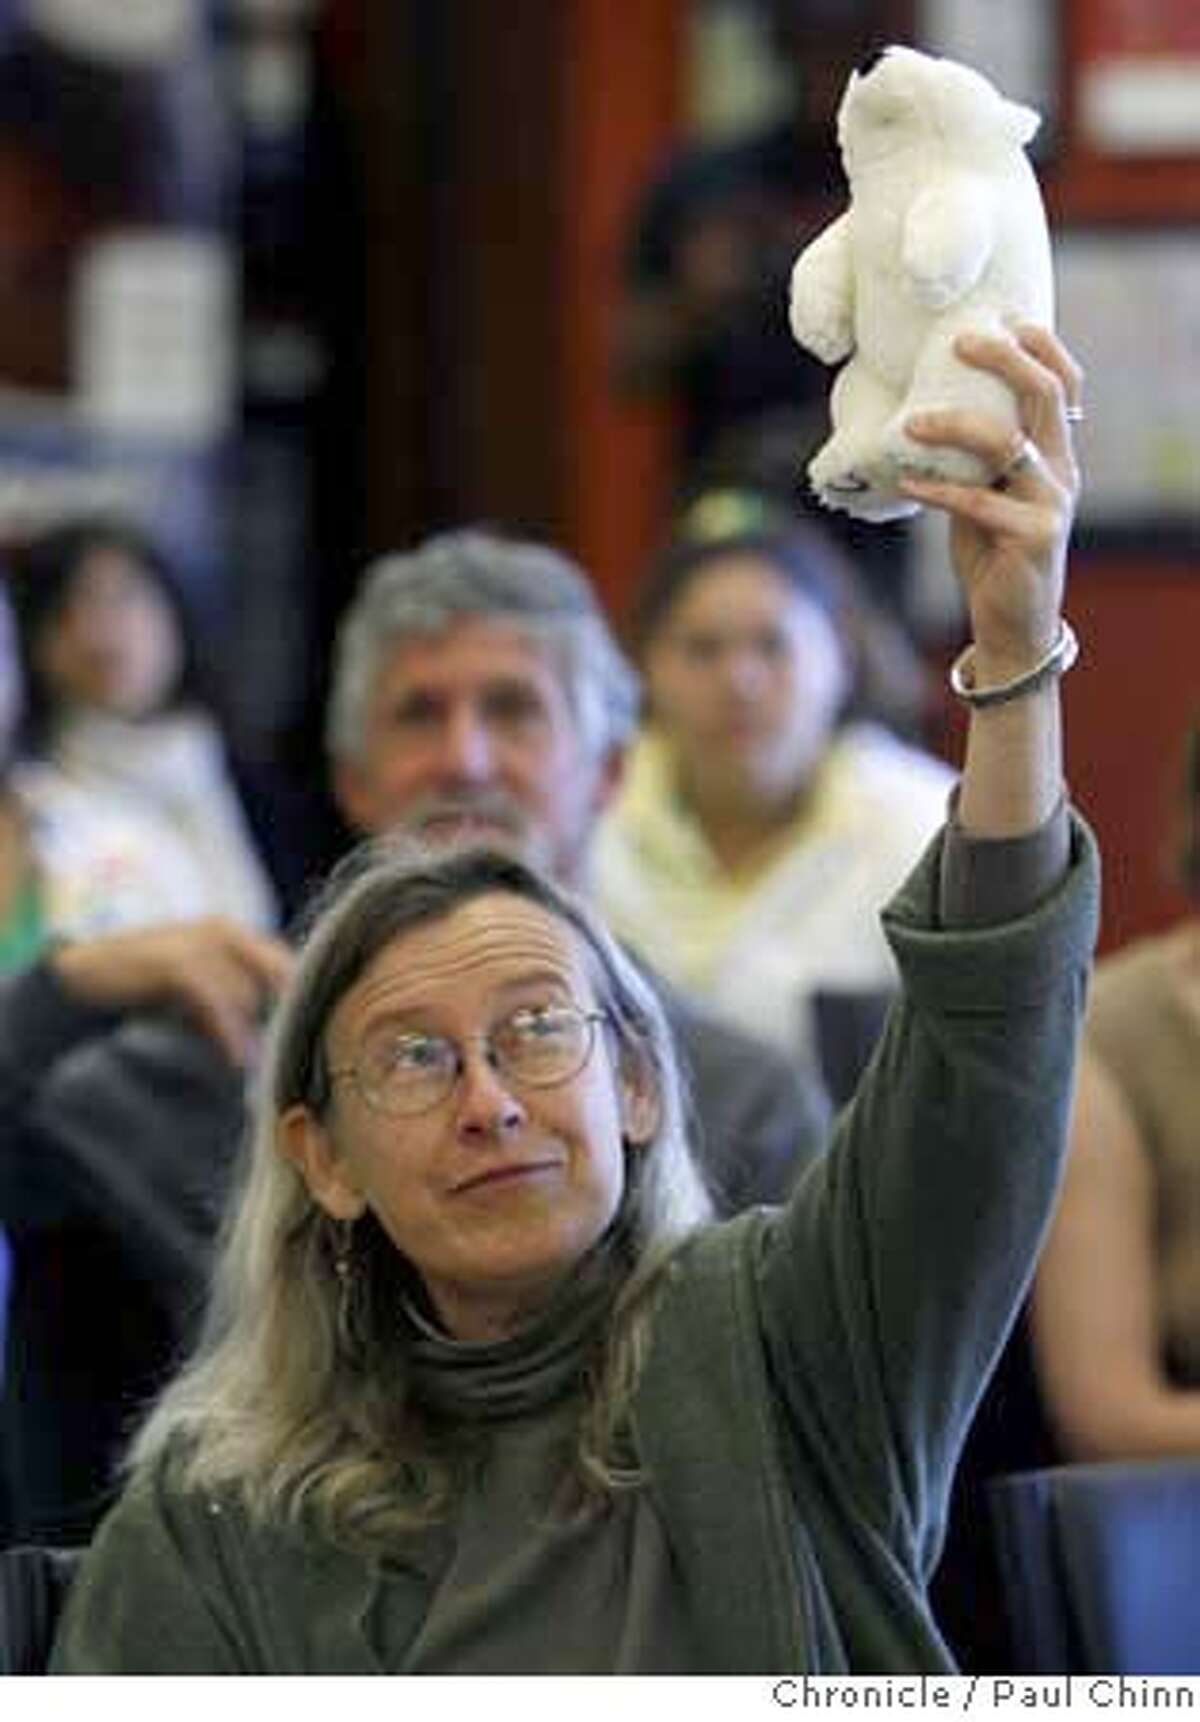 Activist Redwood Mary took on the role of a polar bear during a greenhouse gas demonstration by Albany High student Jacob Delbridge at the Climate Action Kickoff rally in Berkeley, Calif. on Saturday, May 19, 2007. PAUL CHINN/The Chronicle **Redwood Mary, Jacob Delbridge MANDATORY CREDIT FOR PHOTOGRAPHER AND S.F. CHRONICLE/NO SALES - MAGS OUT